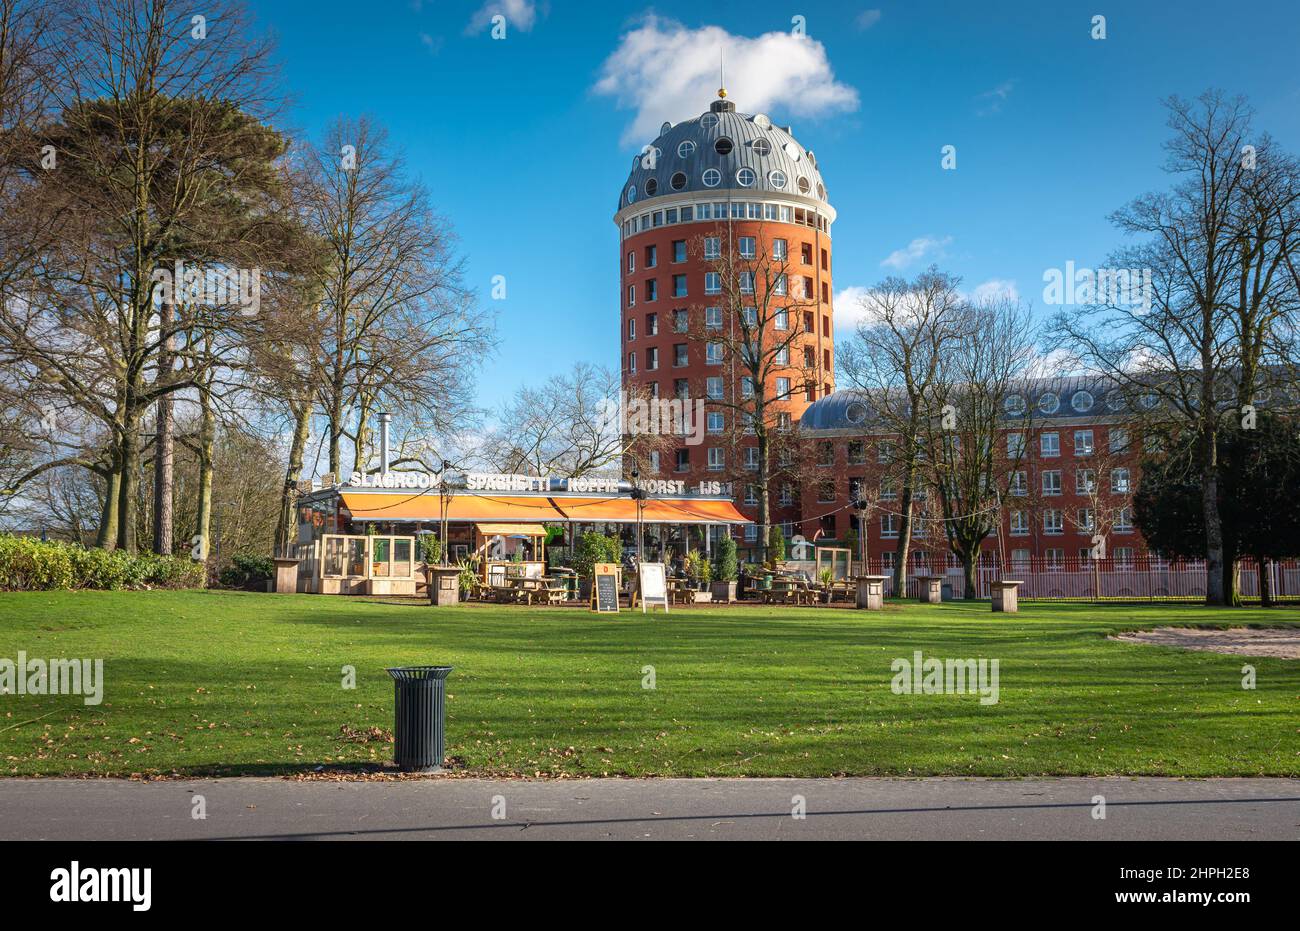 Breda, North Brabant, The Netherlands, 19.02.2022, park Valkenberg with a view of distinct high-rise residential building known as Poort van Breda Stock Photo